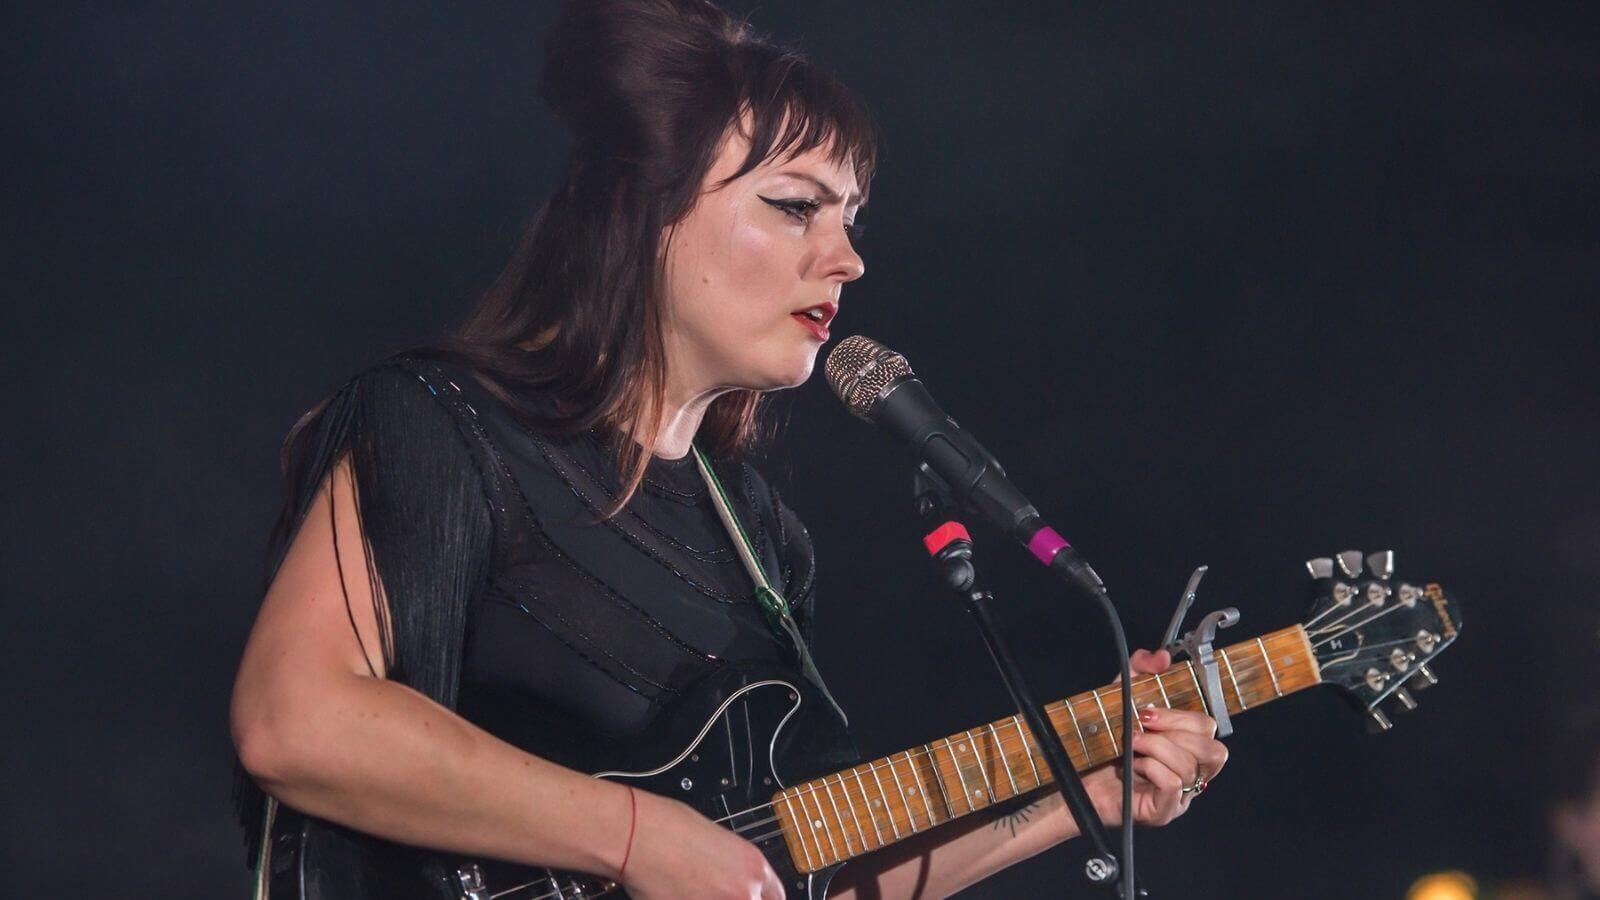 Angel Olsen Confirms She Is Gay In Her New Instagram Post